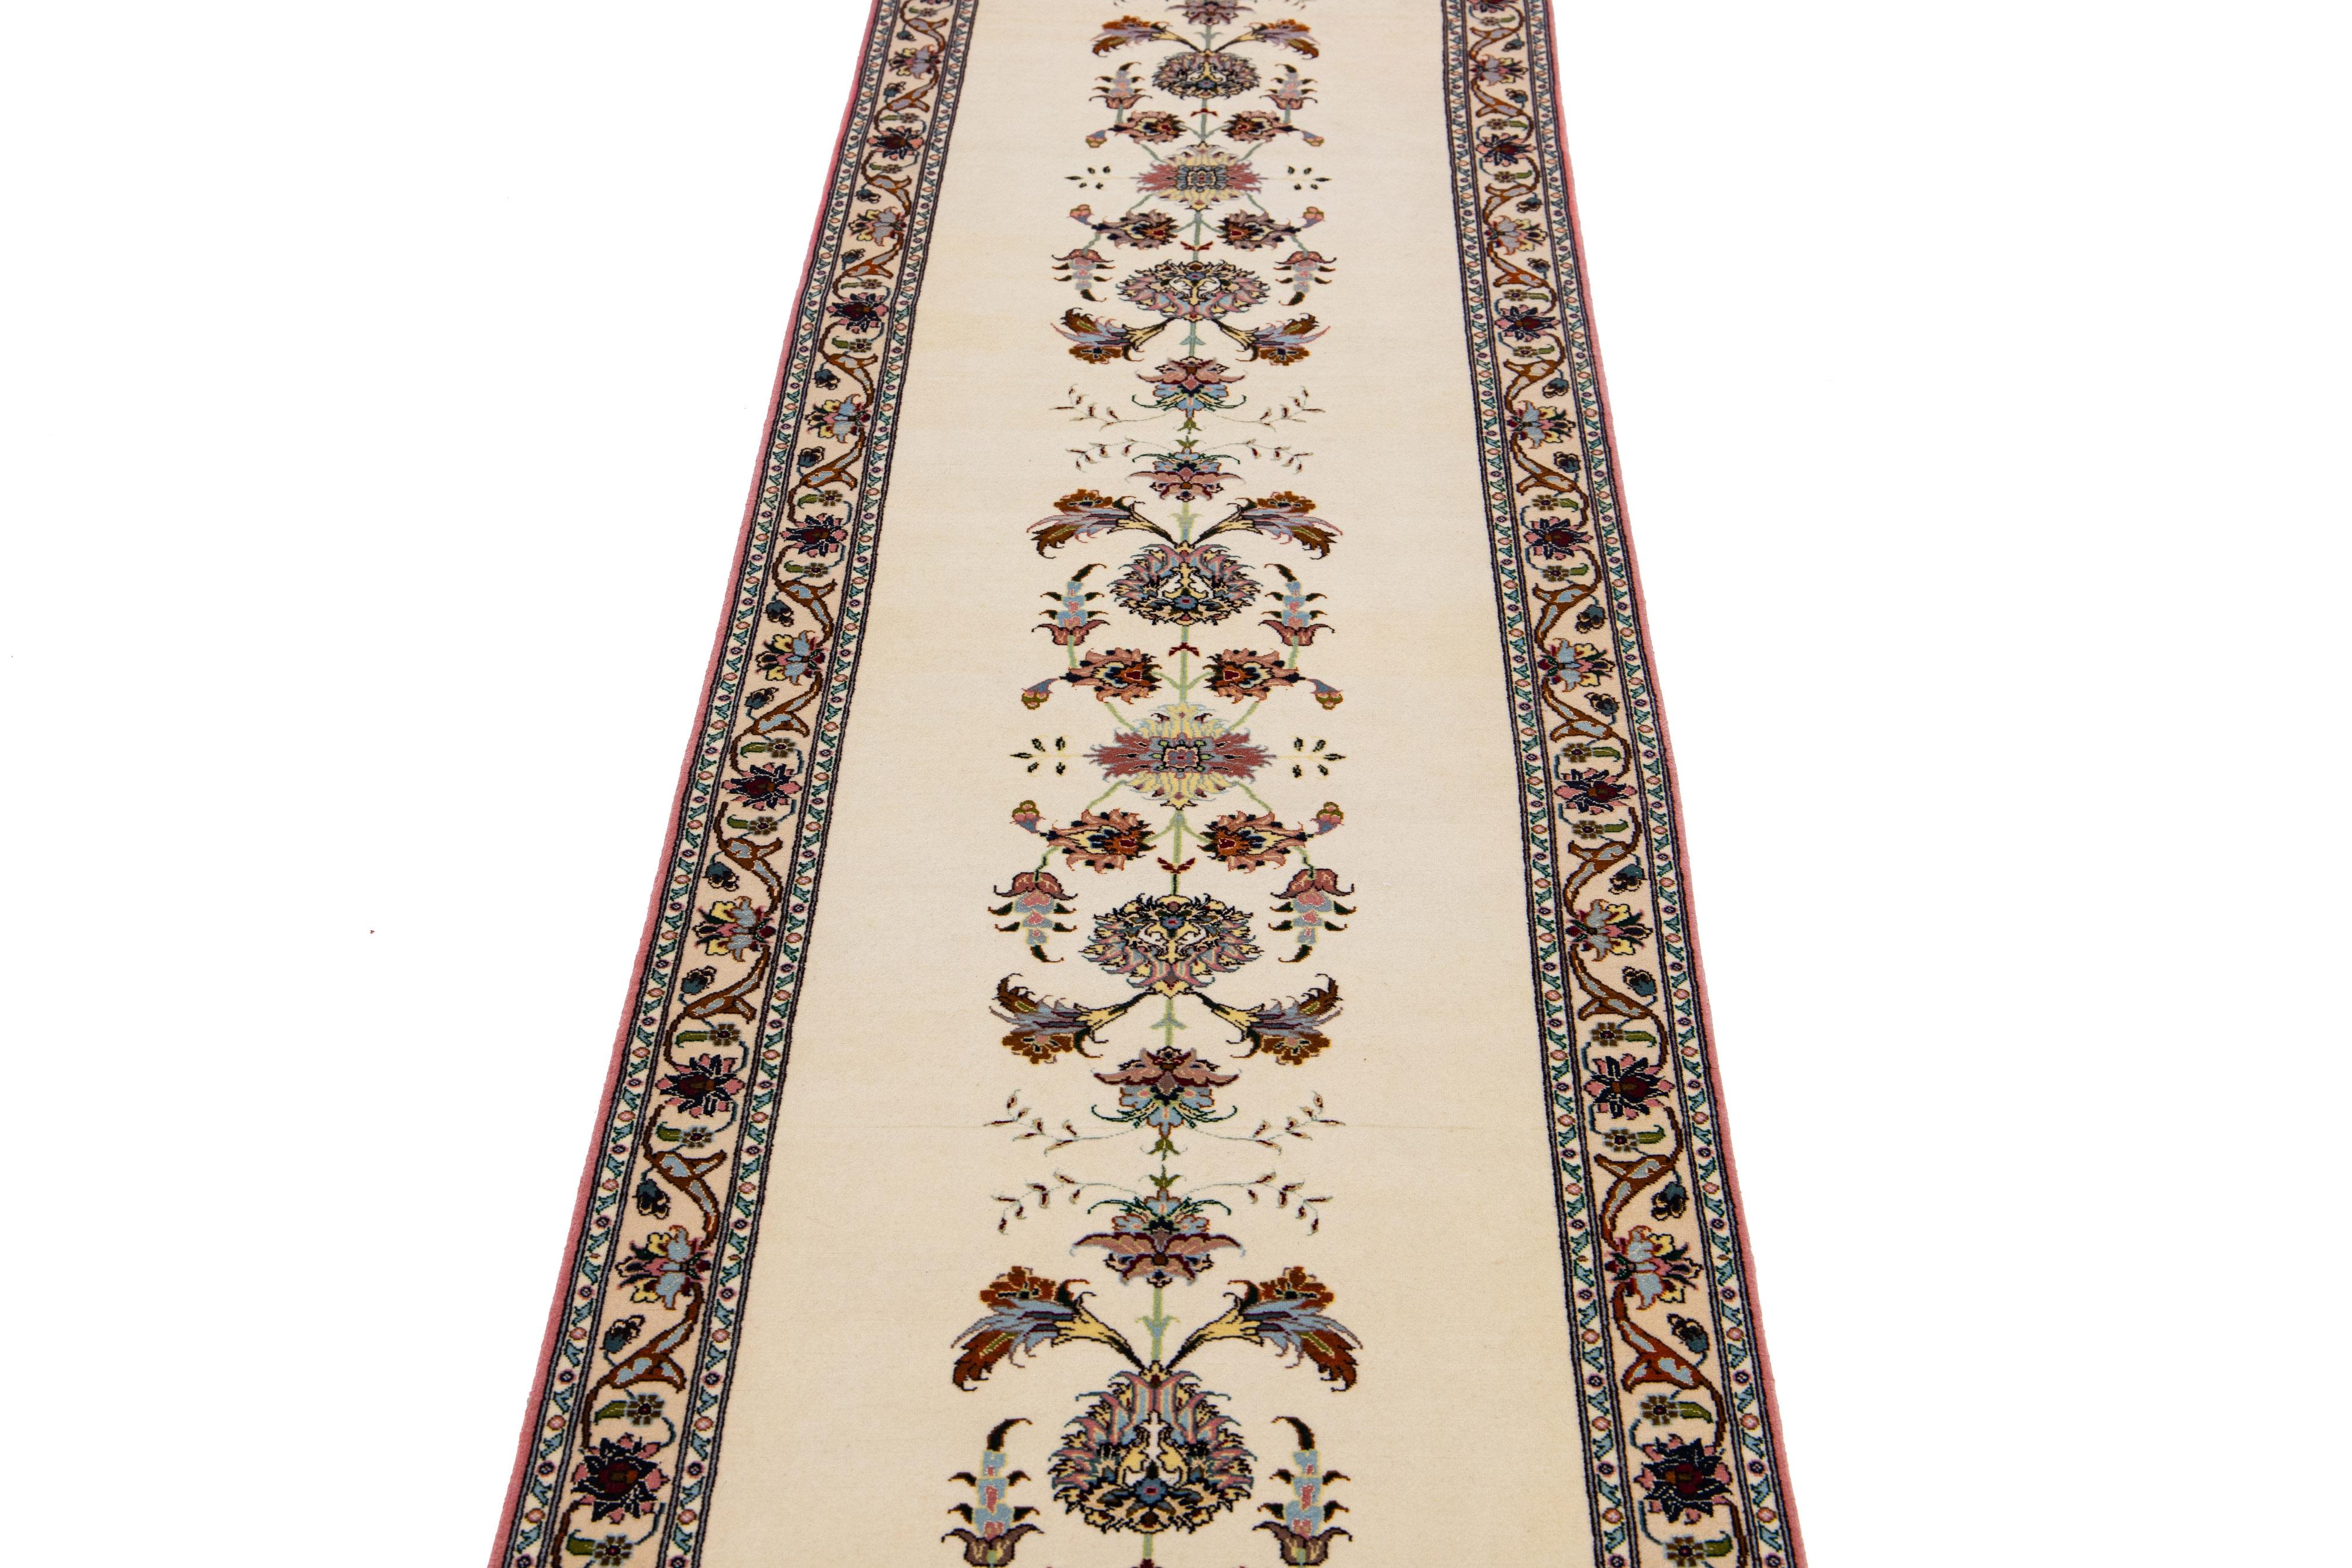 Beautiful Modern Tabriz hand-knotted wool runner with an ivory field. This Tabriz runner has multicolor accents in a gorgeous all-over Shah Abbasi pattern design.

This runner measures: 2'3